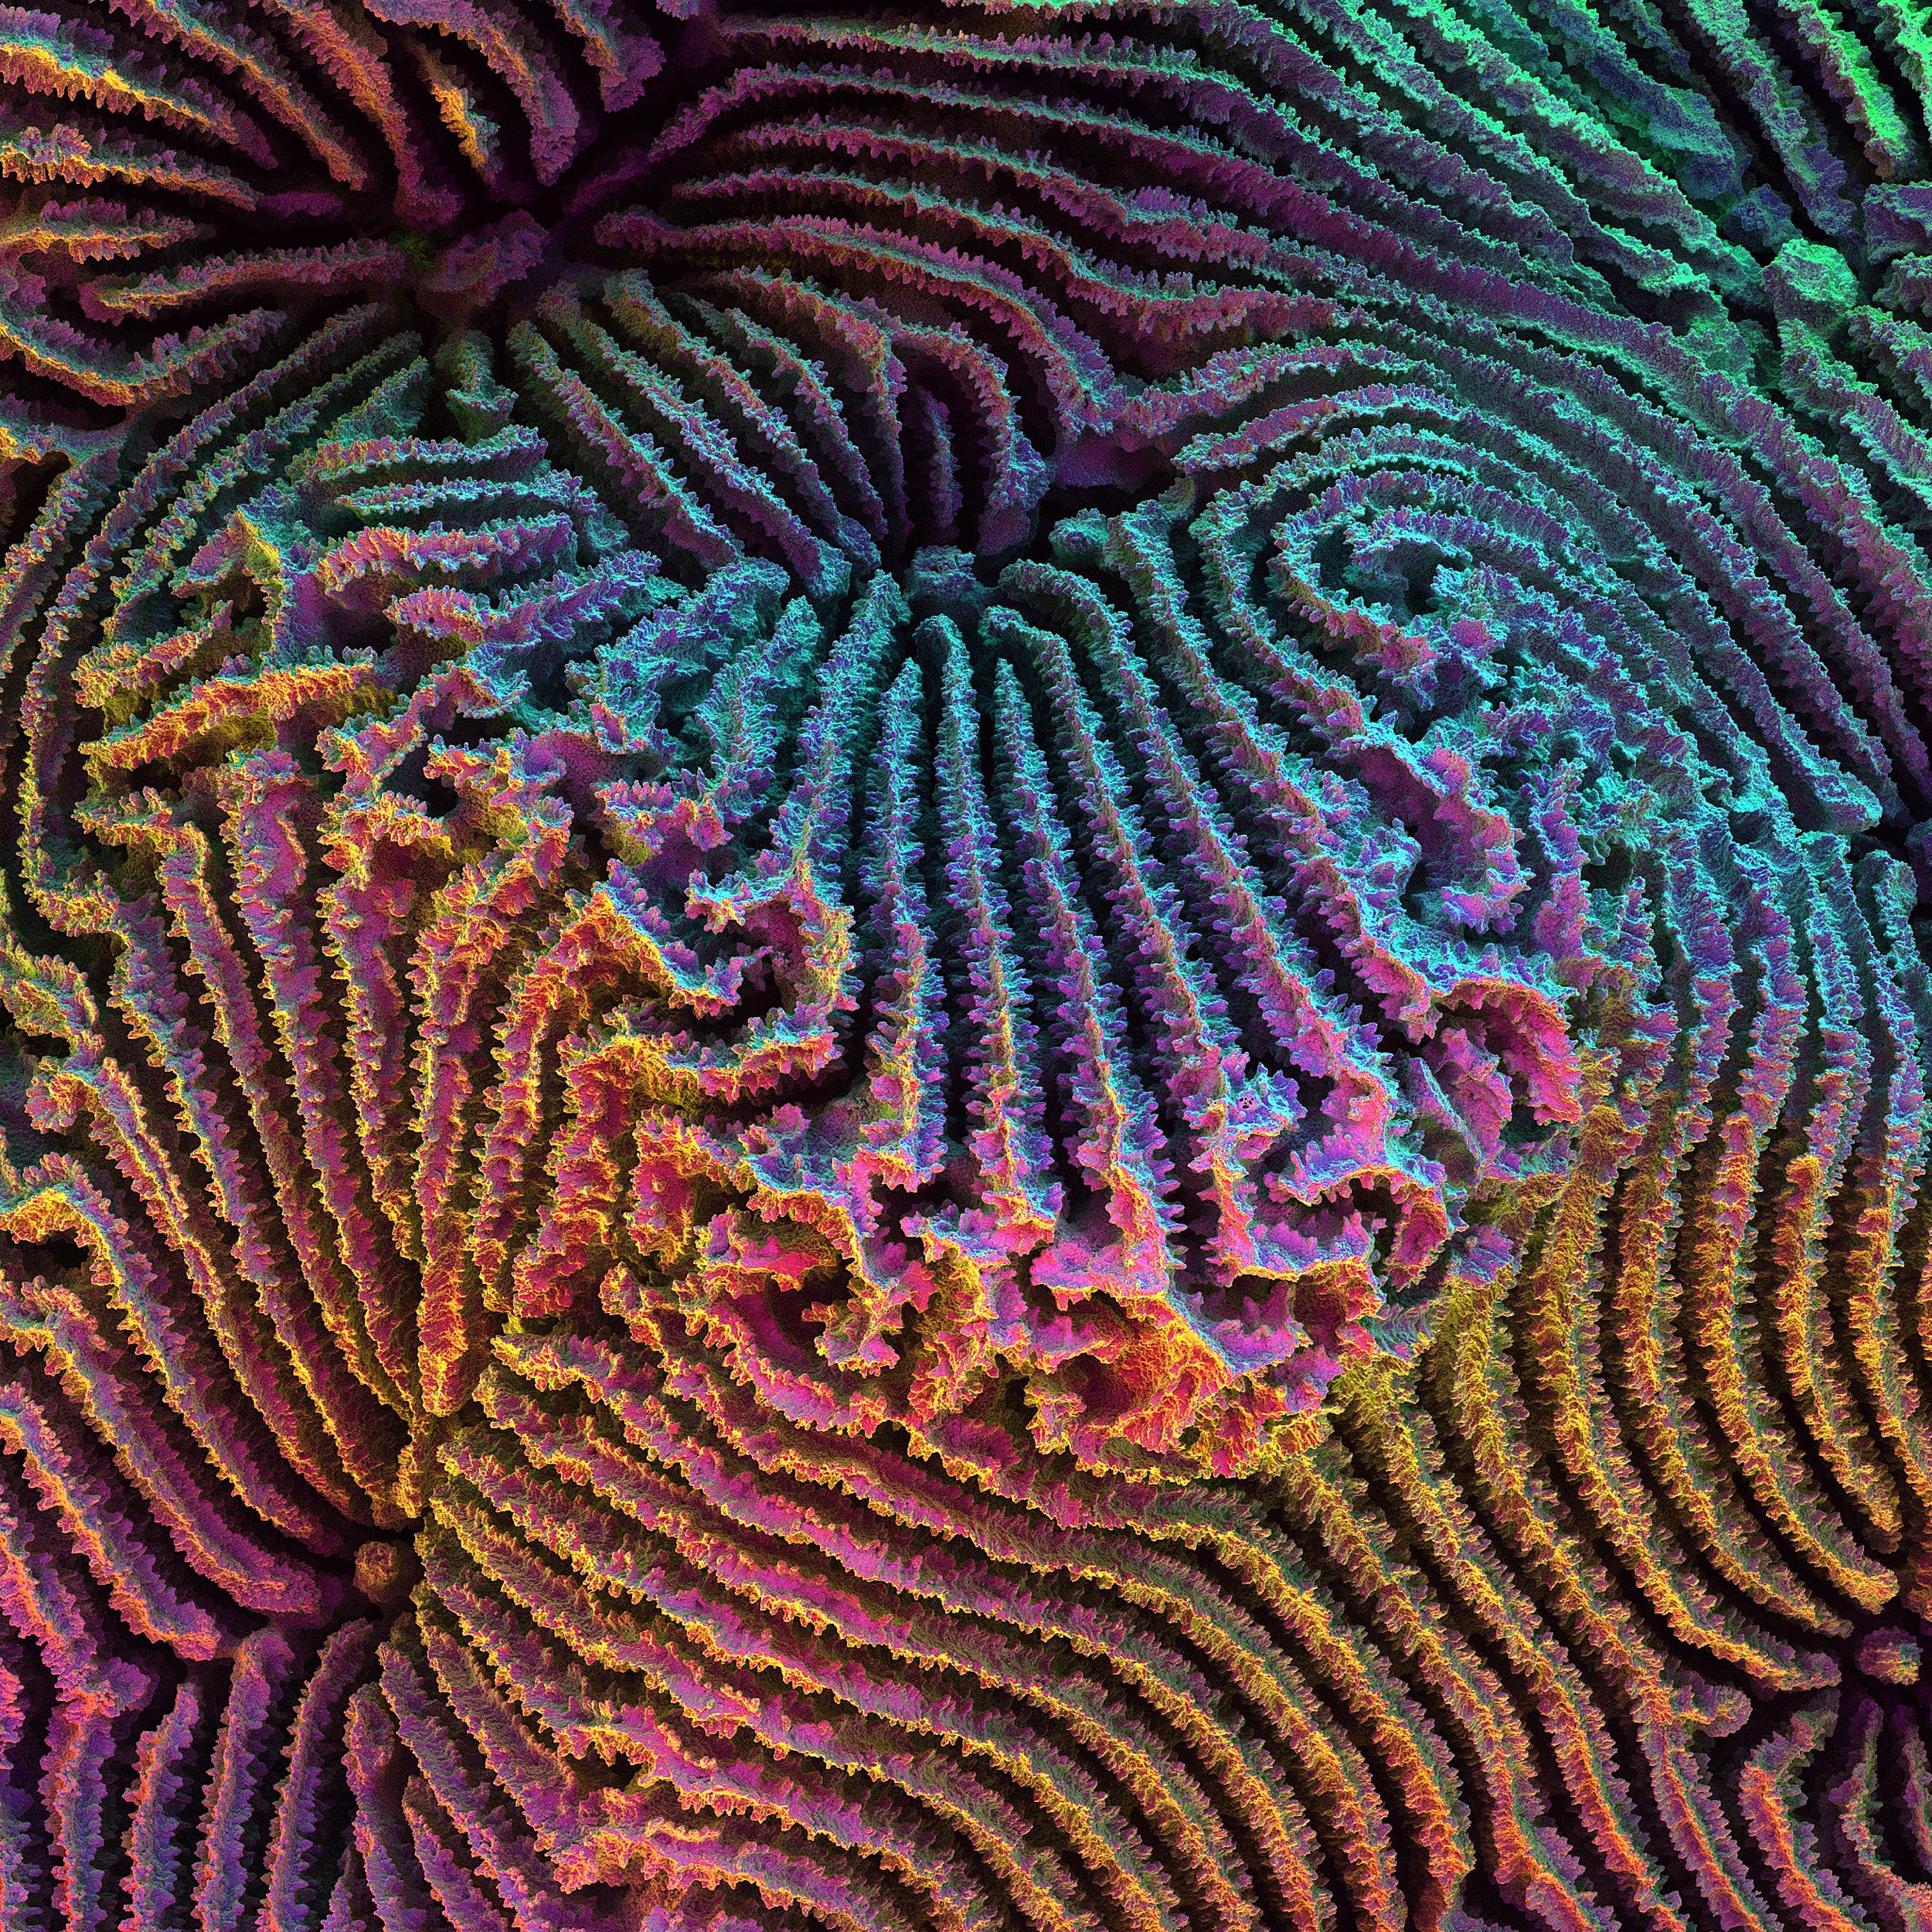 Polychromatic scanning electron micrograph of the skeletal details of the coral, Coscinaraea